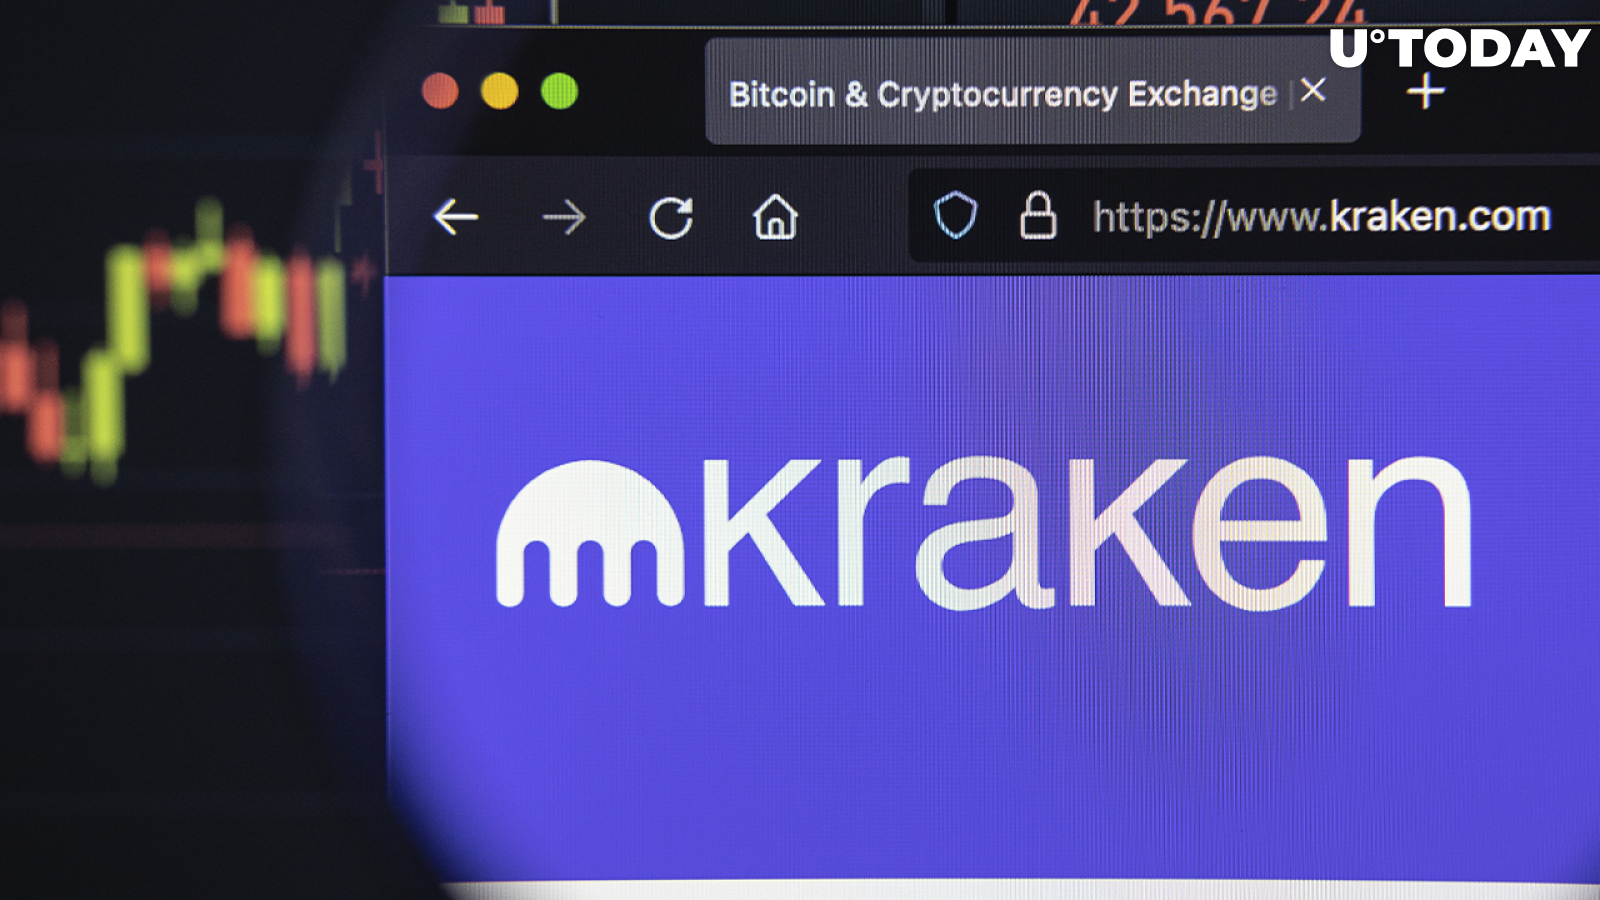 Cardano Founder Eyes Partnership with Kraken for New Layer-2 Blockchain Project